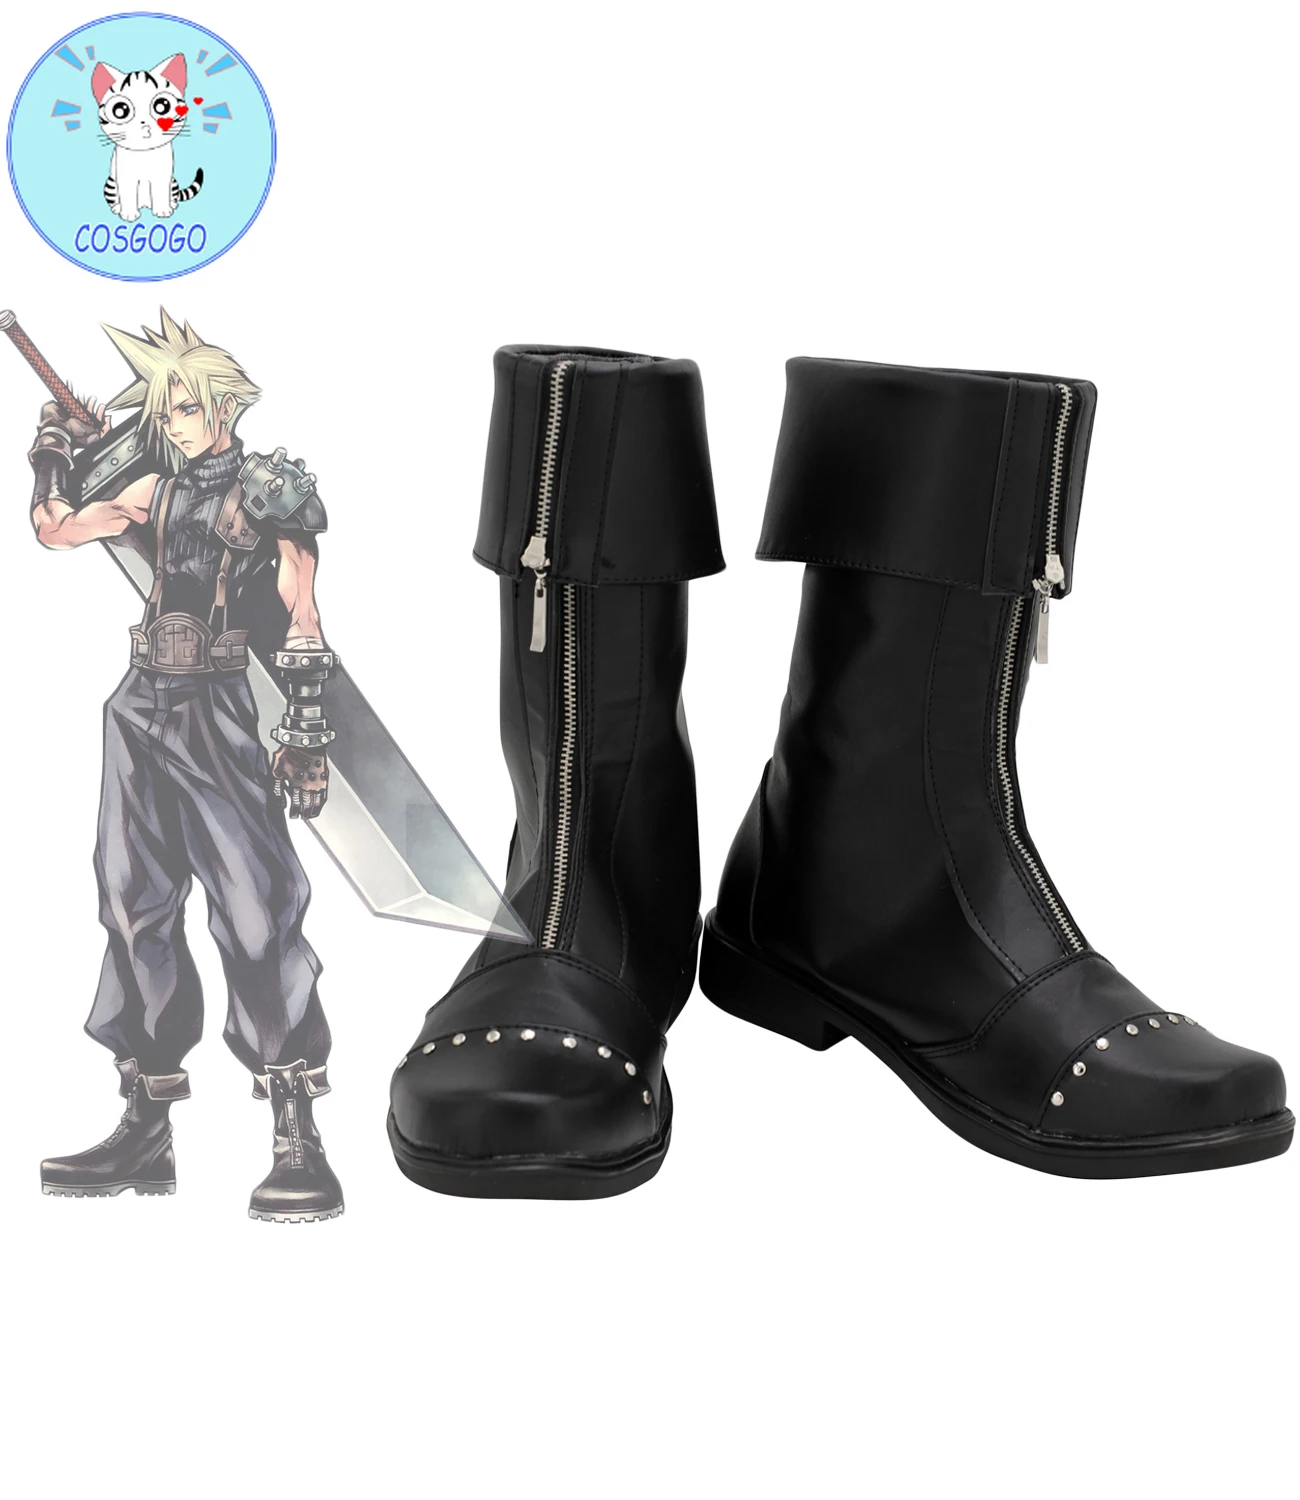 Final Fantasy Cloud Strife Cosplay Shoes Unisex Boots Customized {s0} 